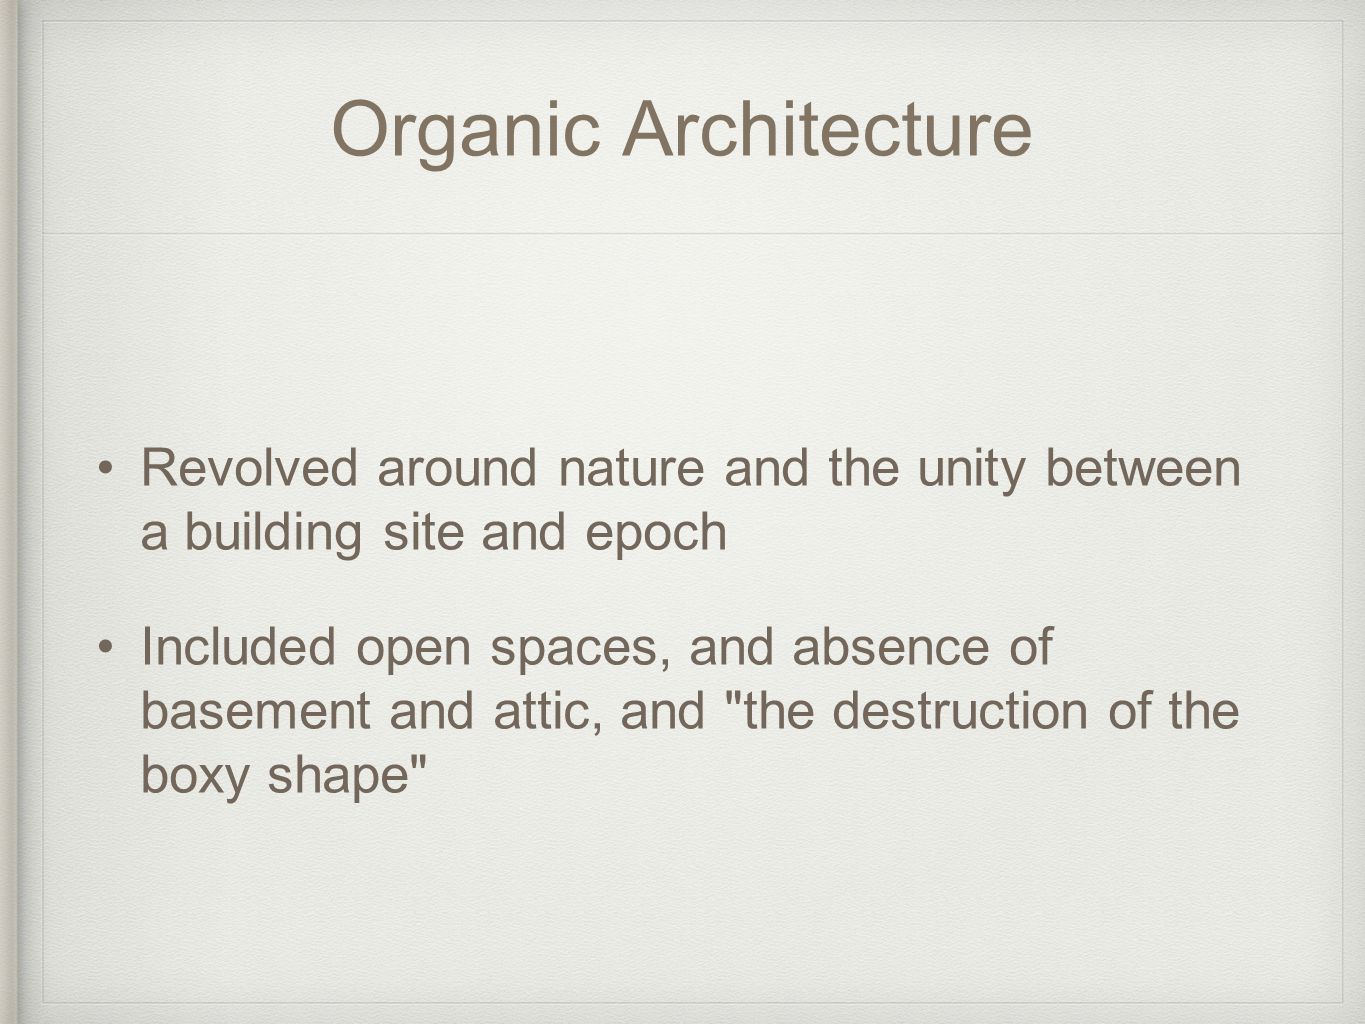 Organic Architecture Revolved around nature and the unity between a building site and epoch.